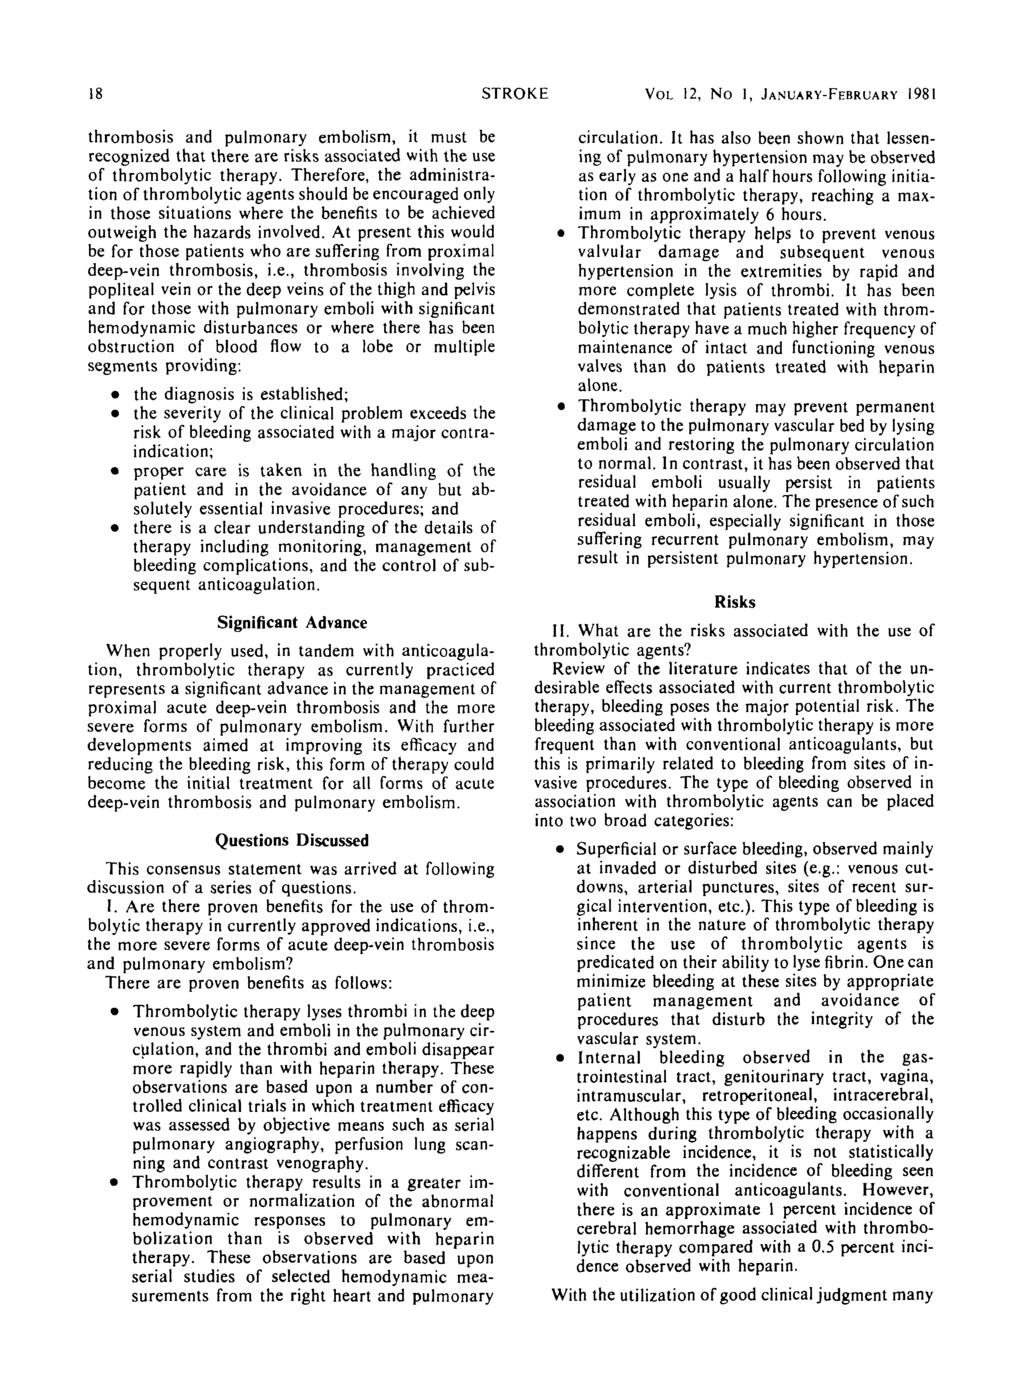 18 STROKE VOL 12, No 1, JANUARY-FEBRUARY 1981 thrombosis and pulmonary embolism, it must be recognized that there are risks associated with the use of thrombolytic therapy.